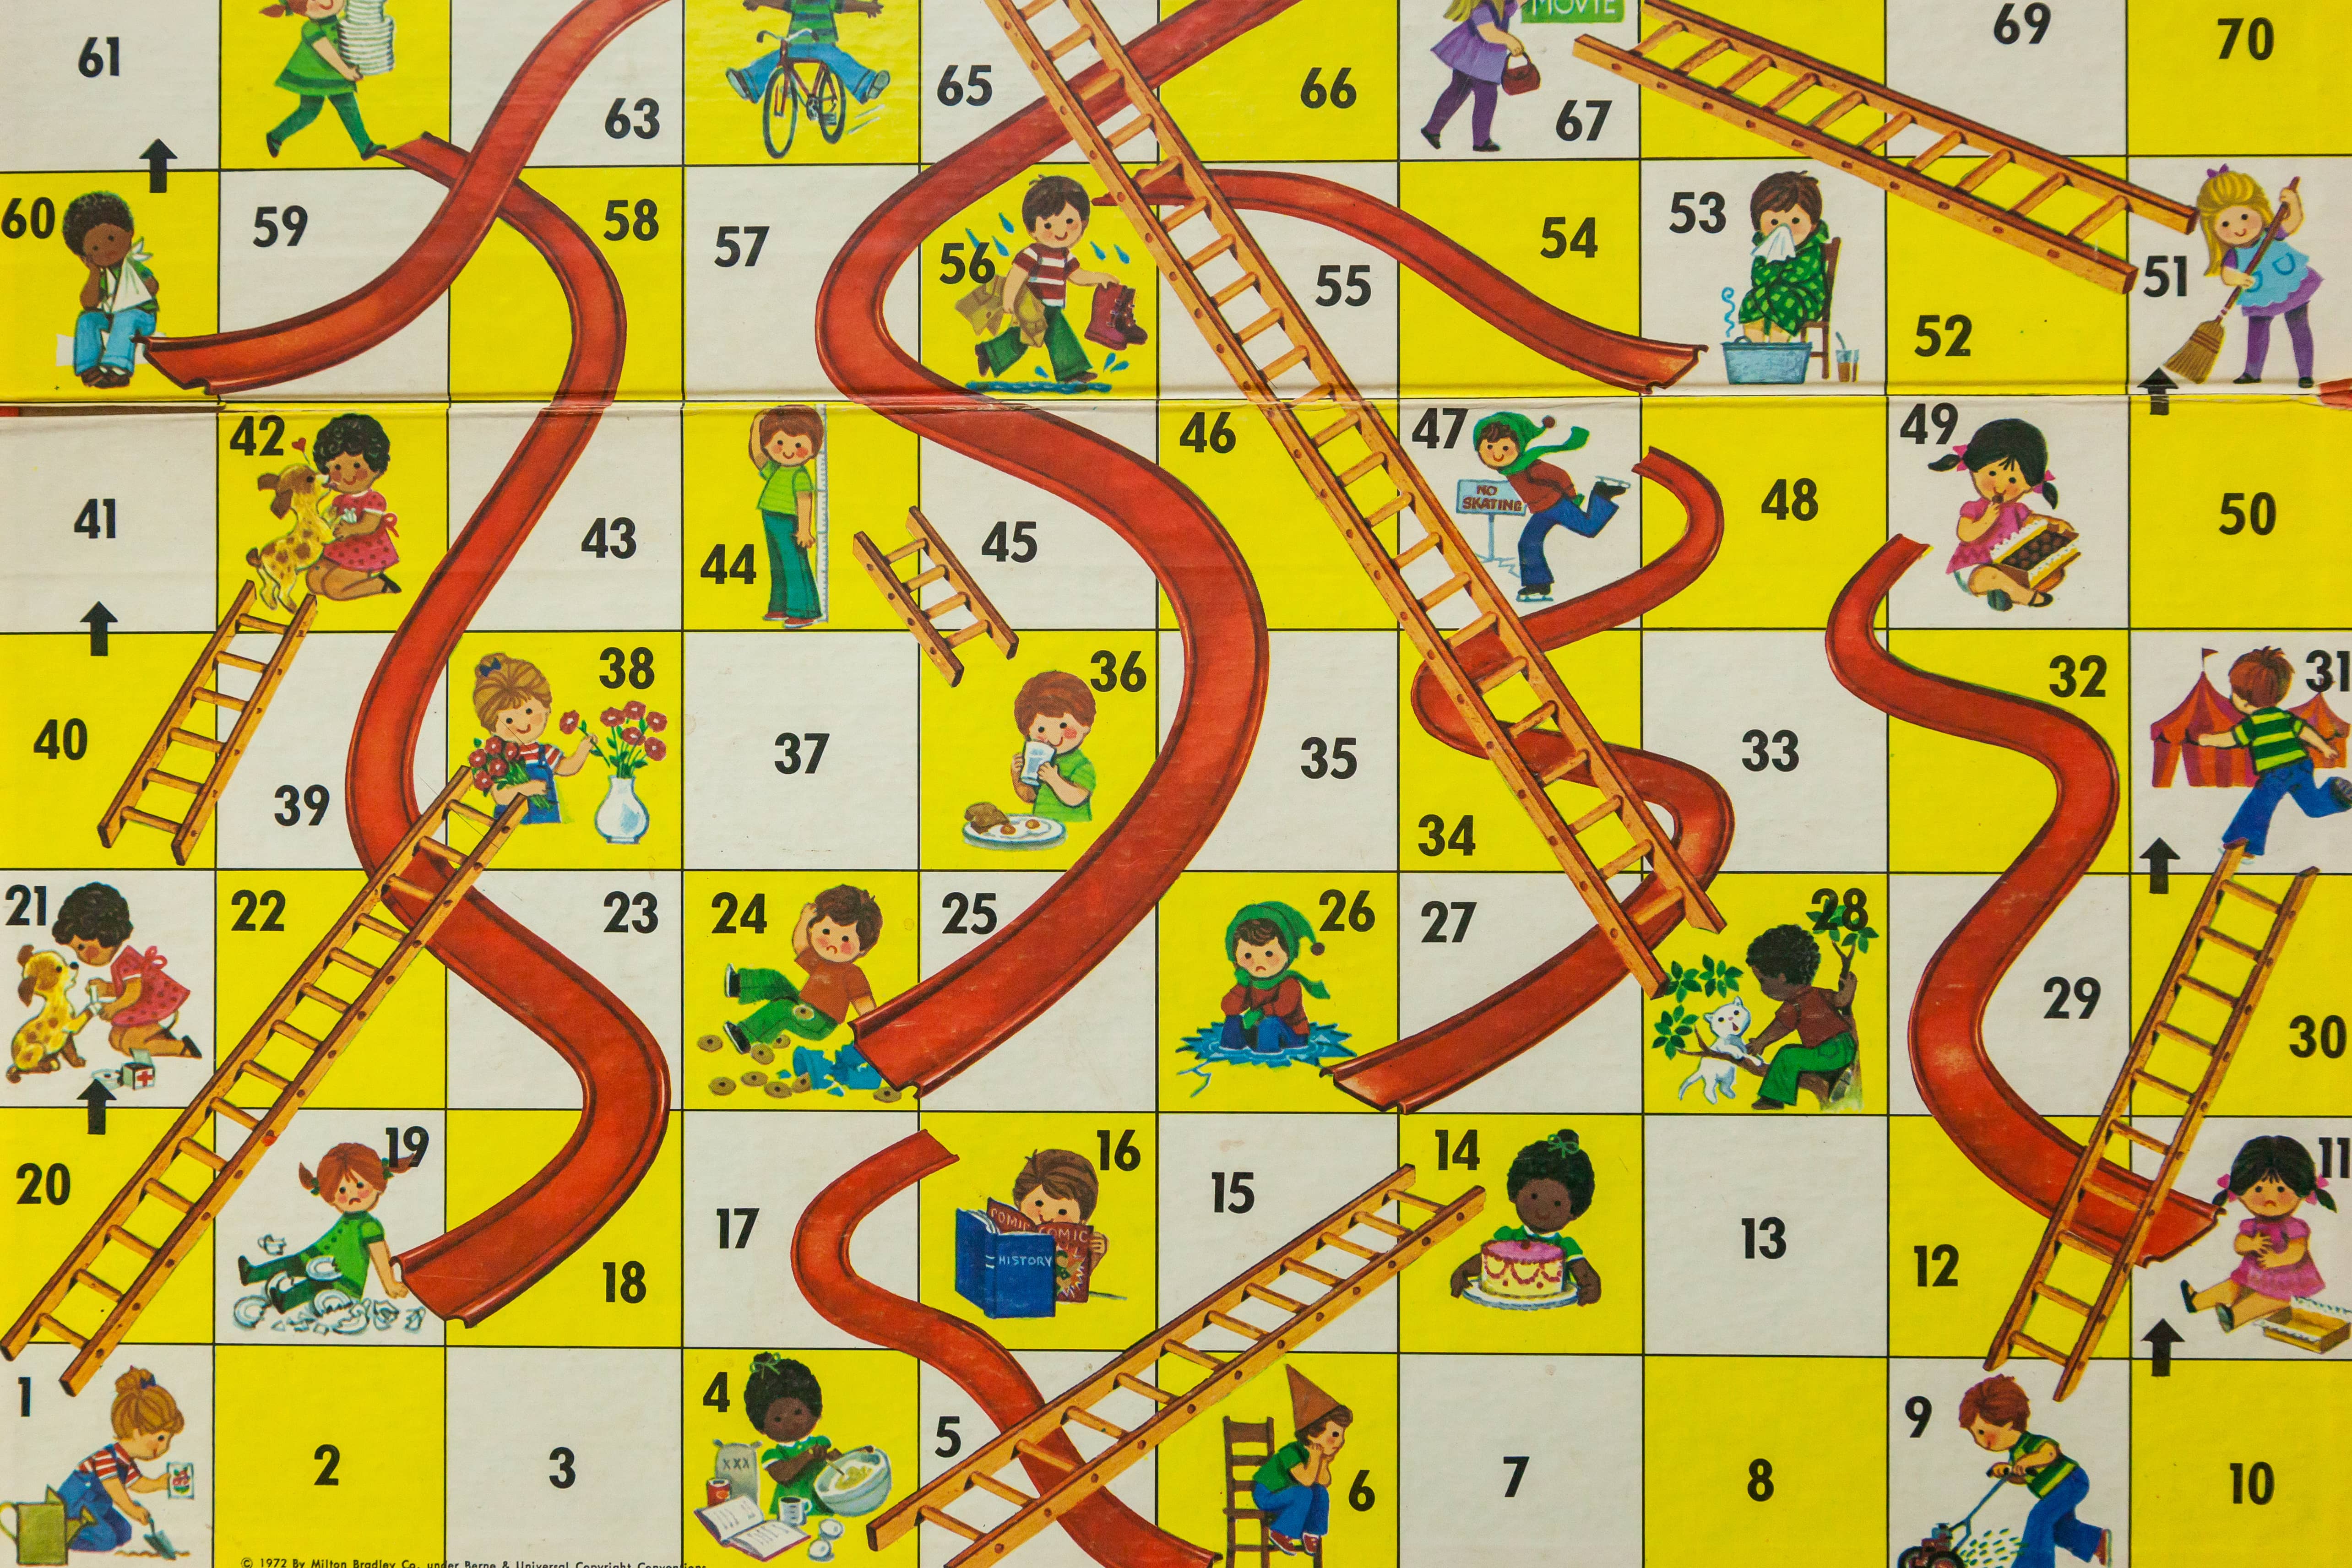 1980 board game of Chutes and Ladders